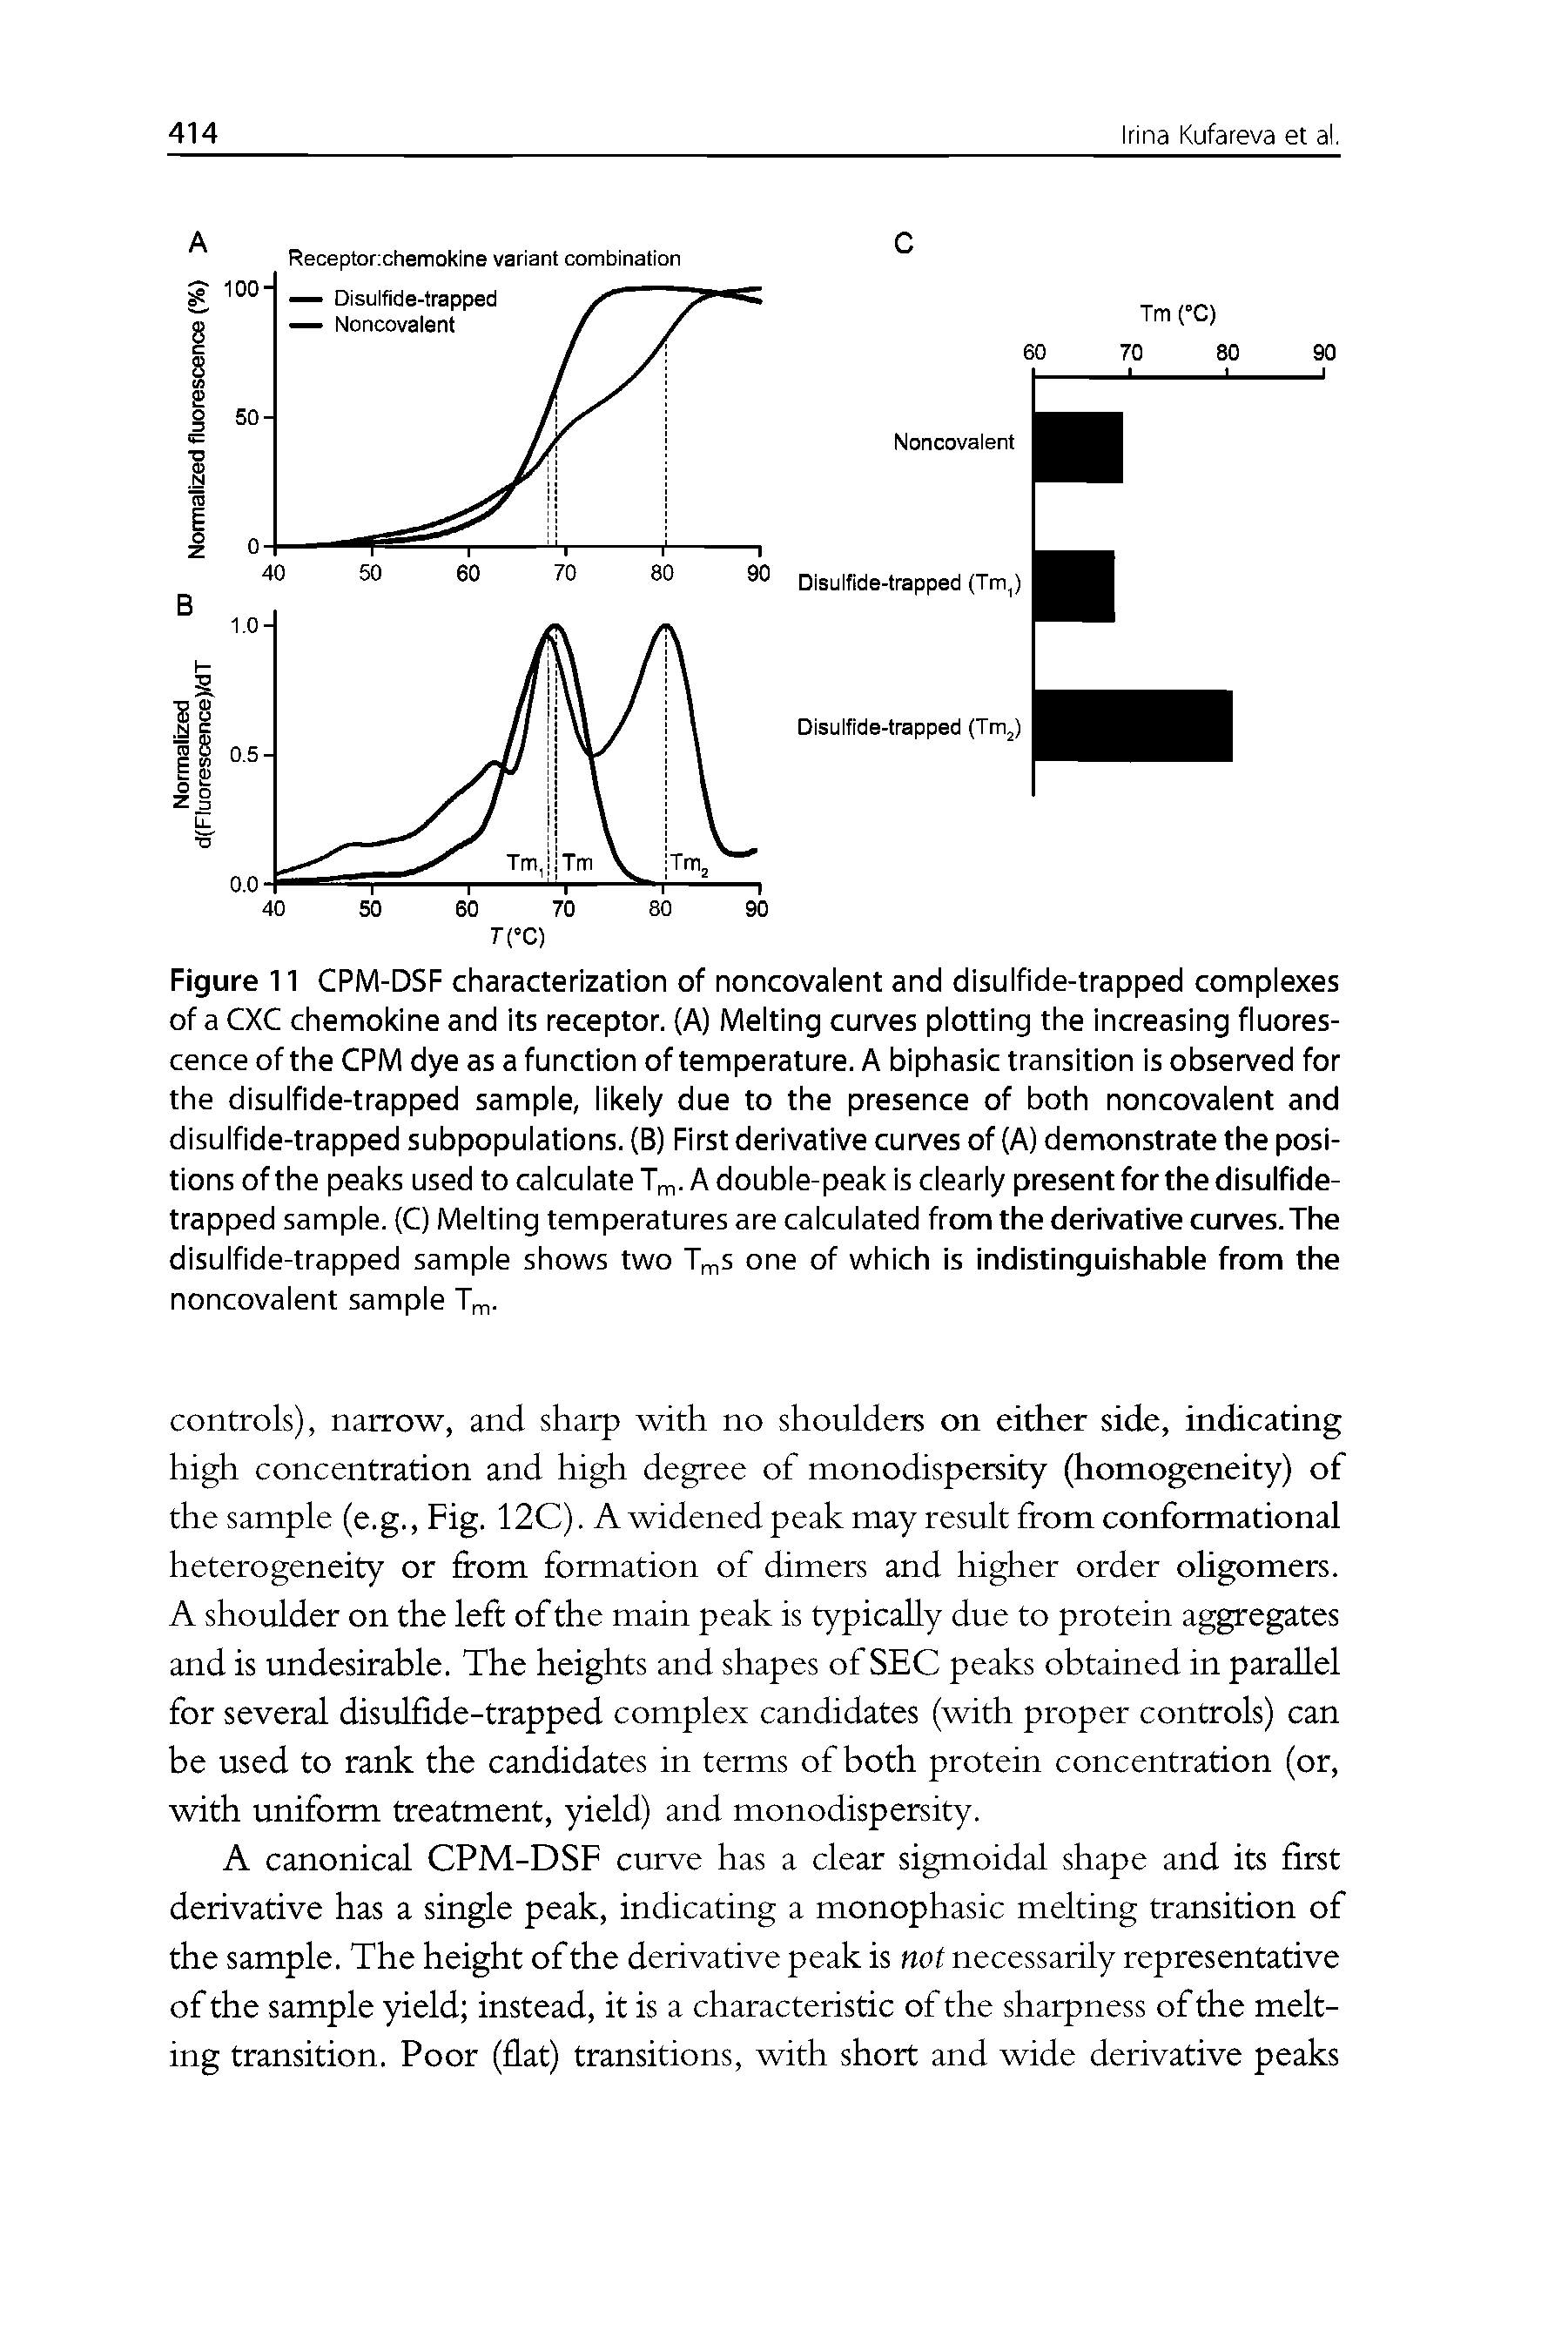 Figure 11 CPM-DSF characterization of noncovalent and disulfide-trapped complexes of a CXC chemokine and its receptor. (A) Melting curves plotting the increasing fluorescence of the CPM dye as a function of temperature. A biphasic transition is observed for the disulfide-trapped sample, likely due to the presence of both noncovalent and disulfide-trapped subpopulations. (B) First derivative curves of (A) demonstrate the positions of the peaks used to calculate Tm- A double-peak is clearly present for the disulfide-trapped sample. (C) Melting temperatures are calculated from the derivative curves.The disulfide-trapped sample shows two TmS one of which is indistinguishable from the noncovalent sample Tm-...